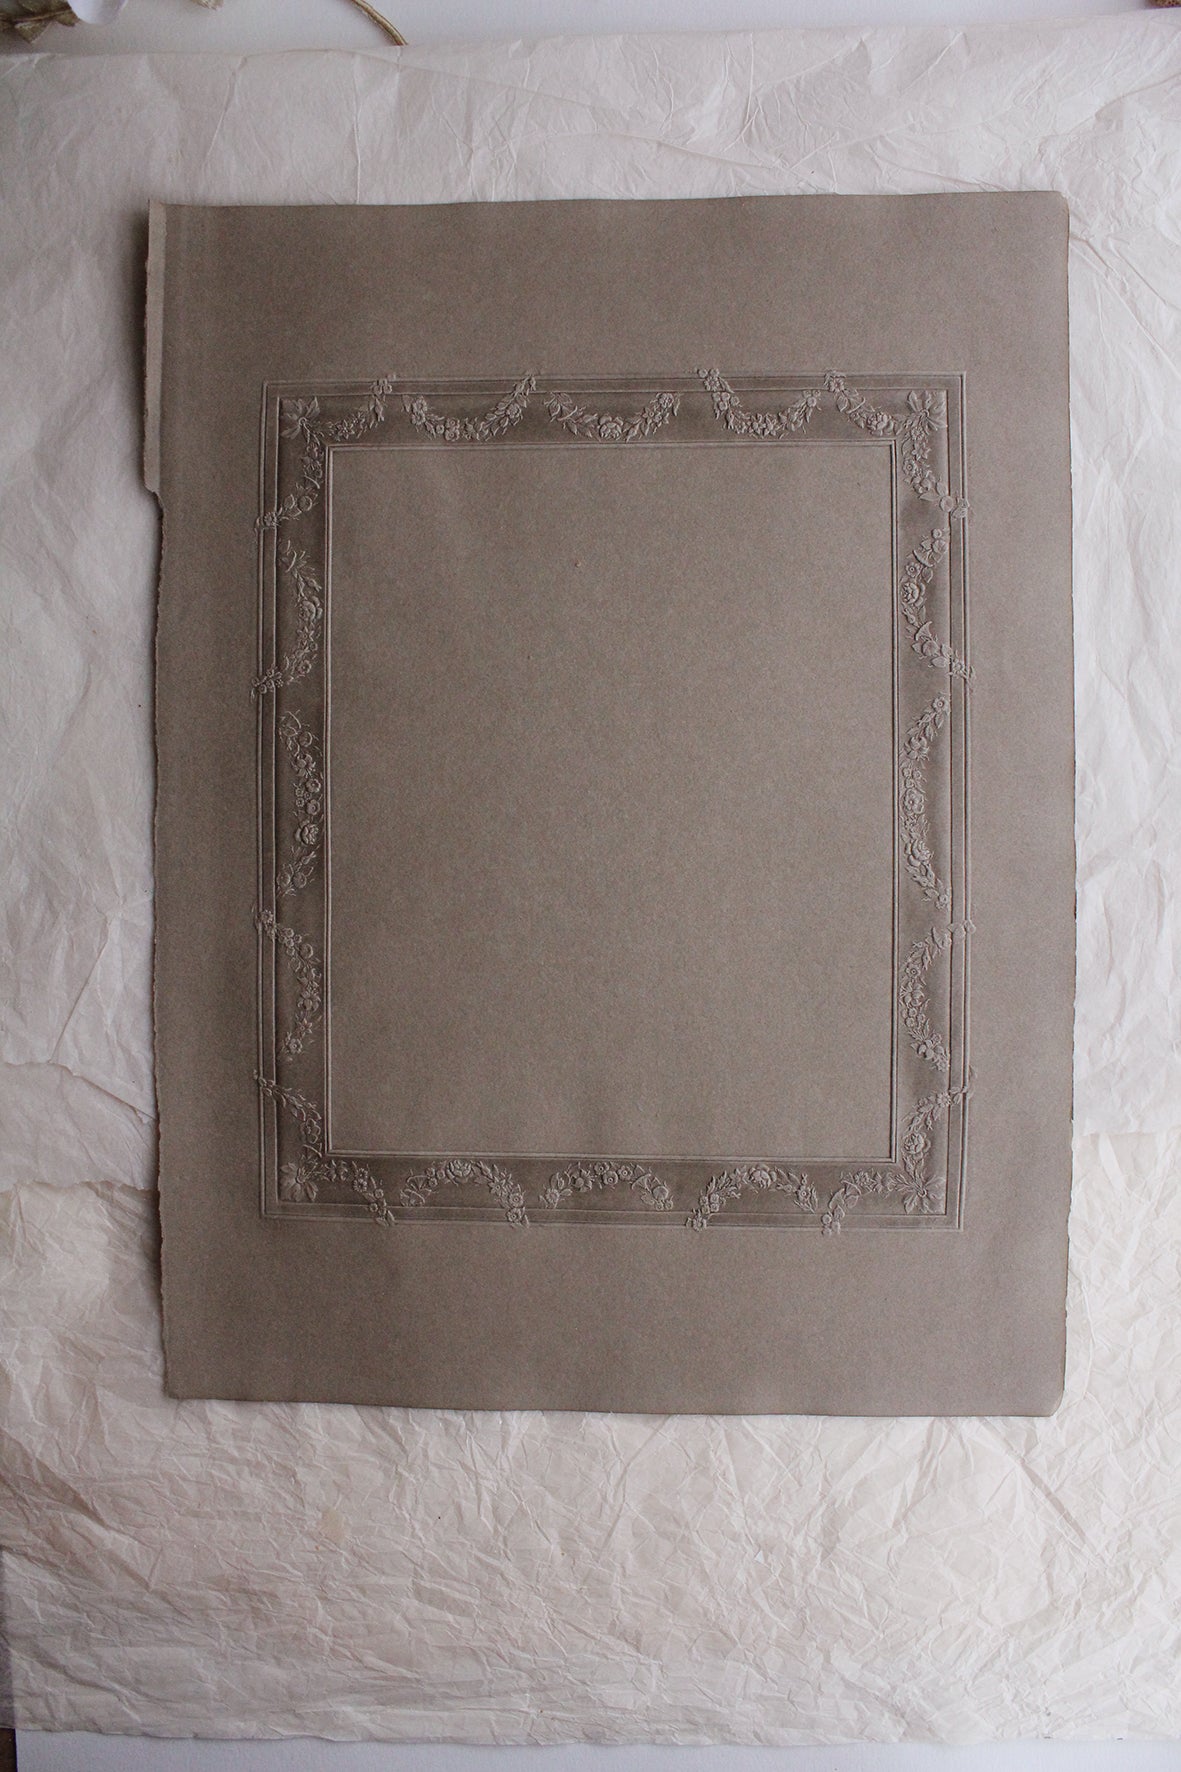 Rare Decorative Embossed Borders - frame two